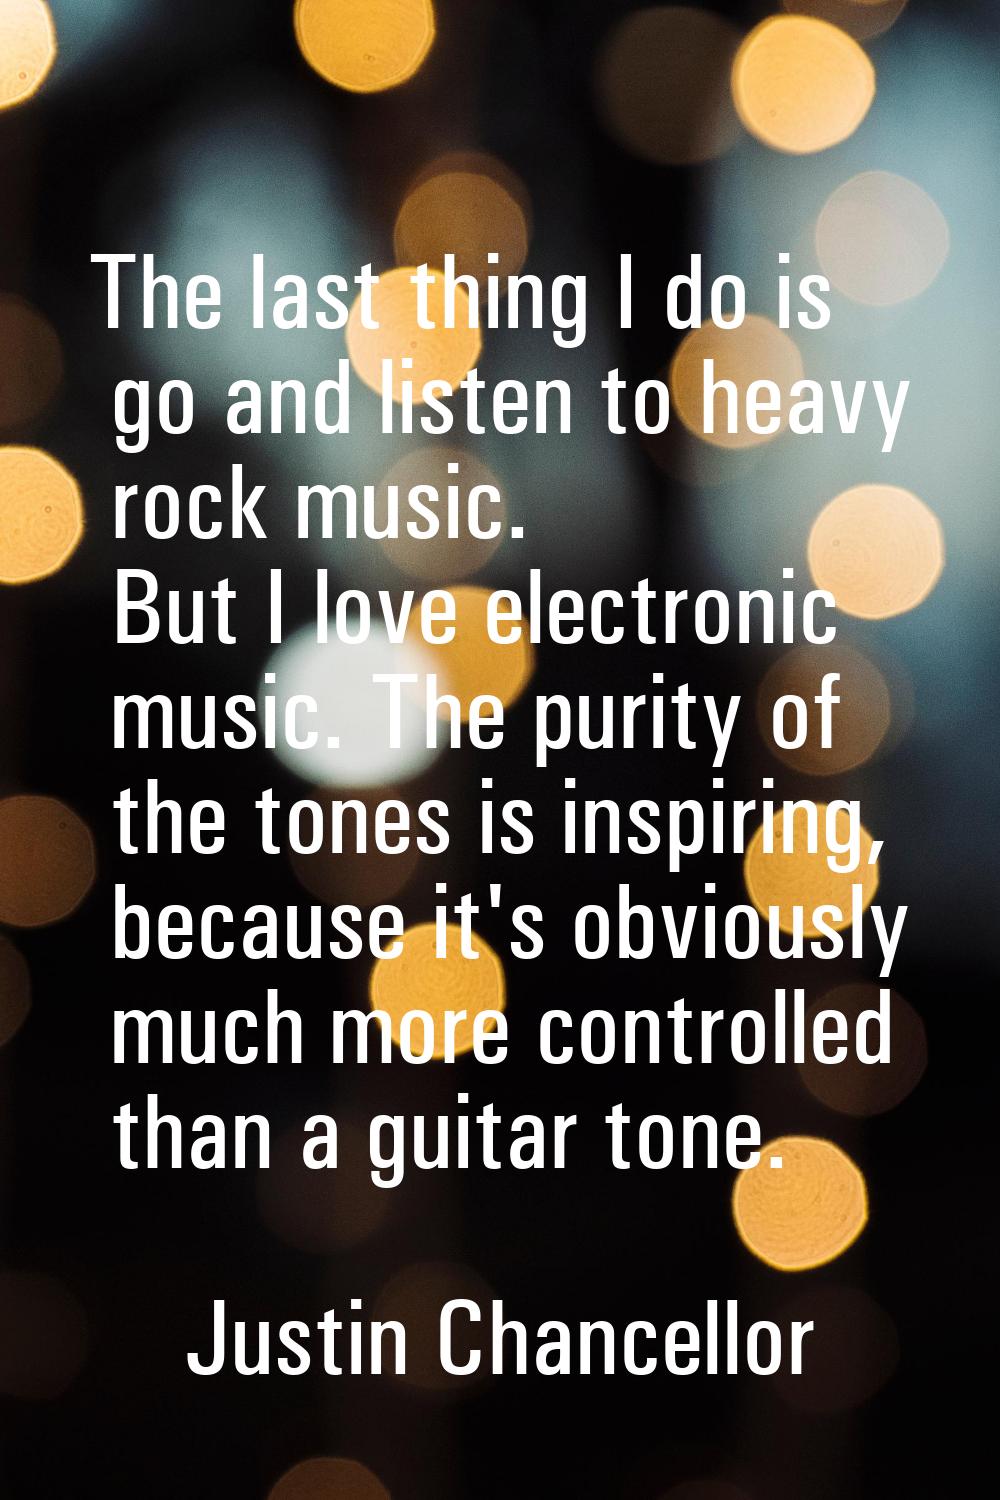 The last thing I do is go and listen to heavy rock music. But I love electronic music. The purity o